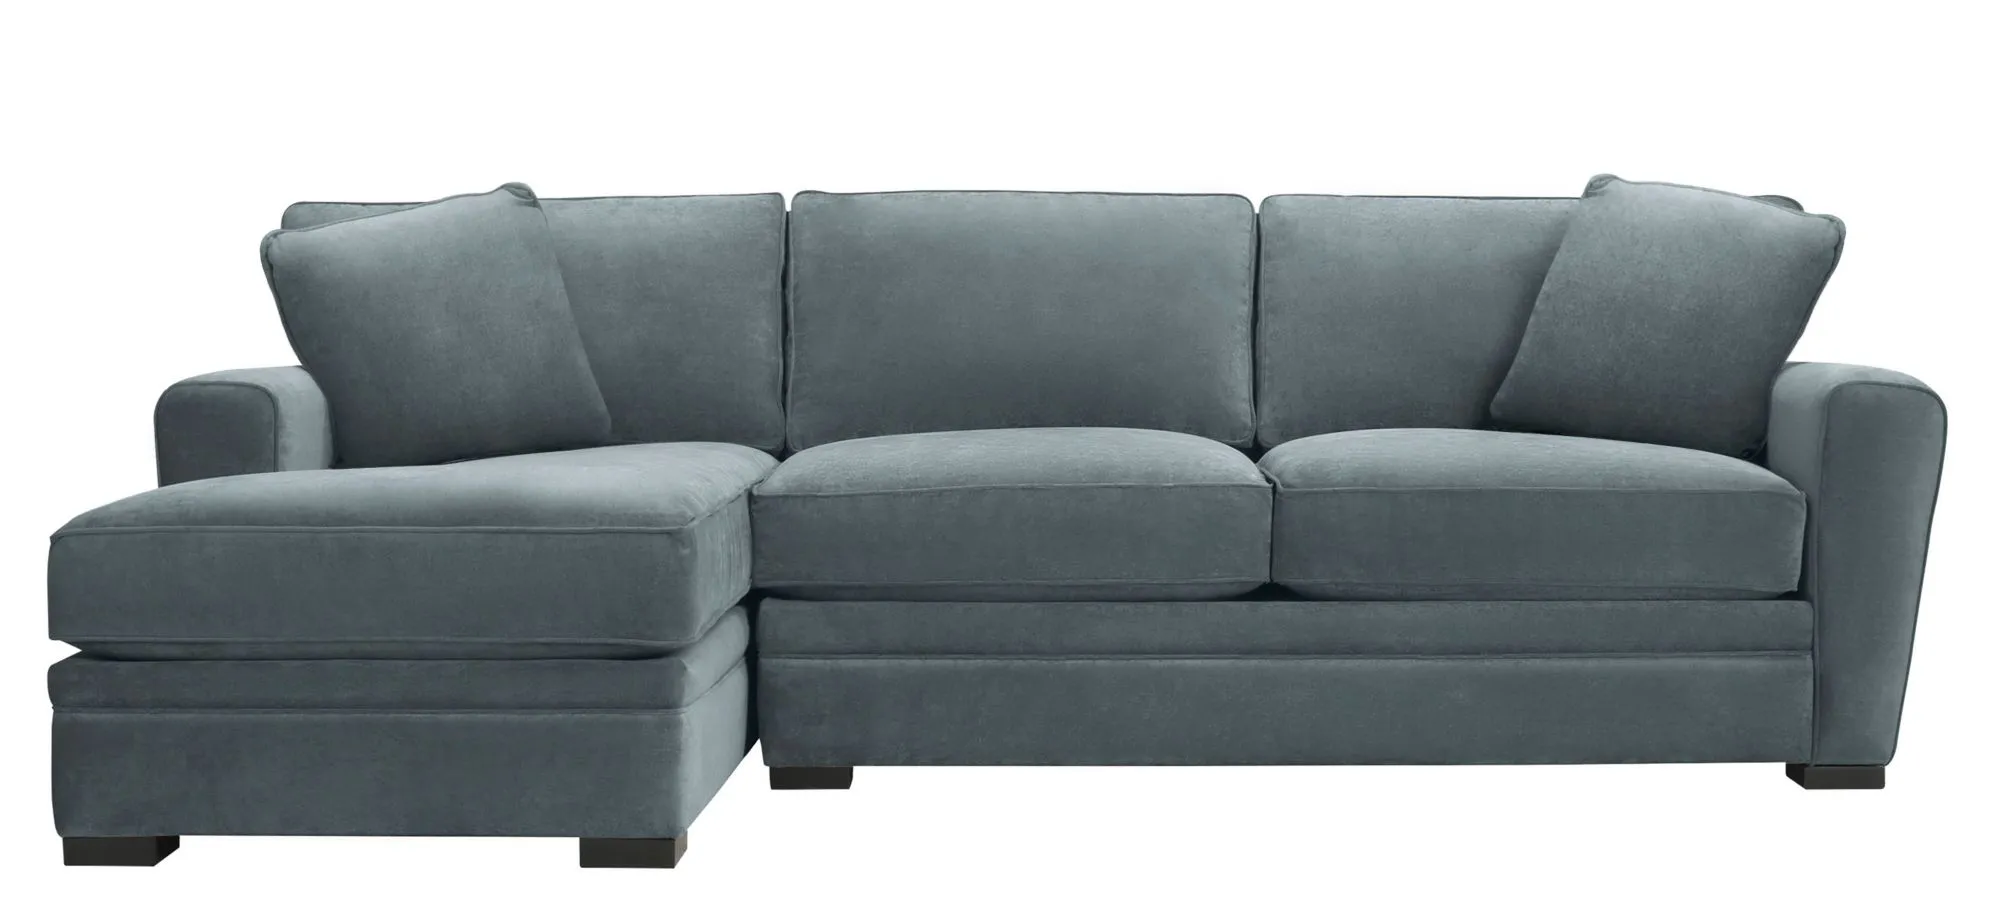 Artemis II 2-pc. Left Hand Facing Sectional Sofa in Gypsy Blue Goblin by Jonathan Louis